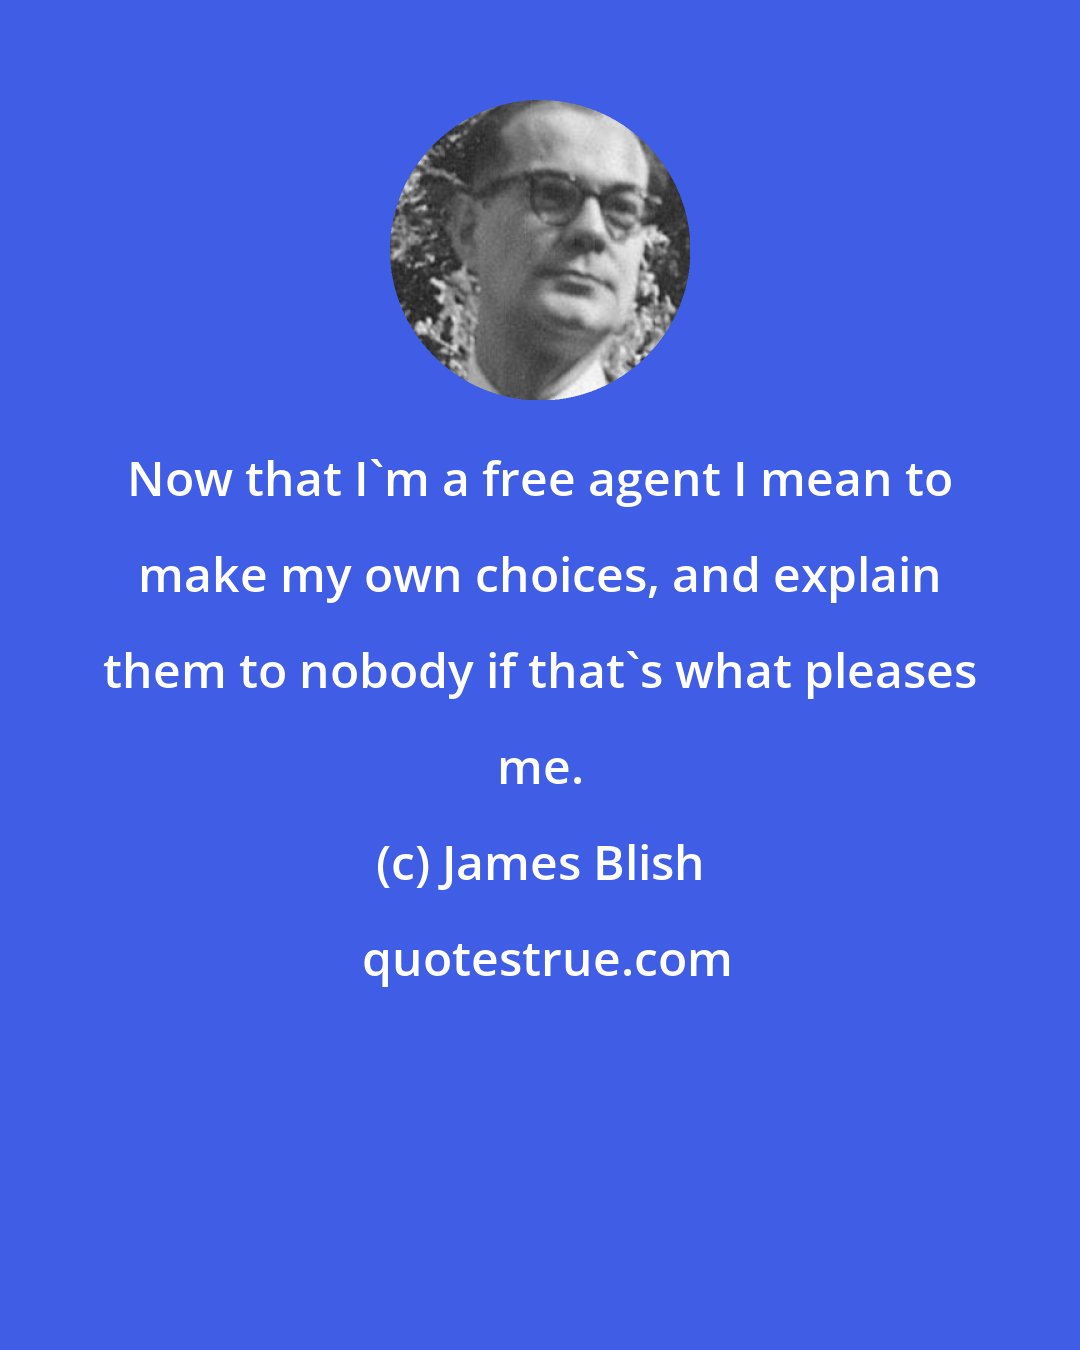 James Blish: Now that I'm a free agent I mean to make my own choices, and explain them to nobody if that's what pleases me.